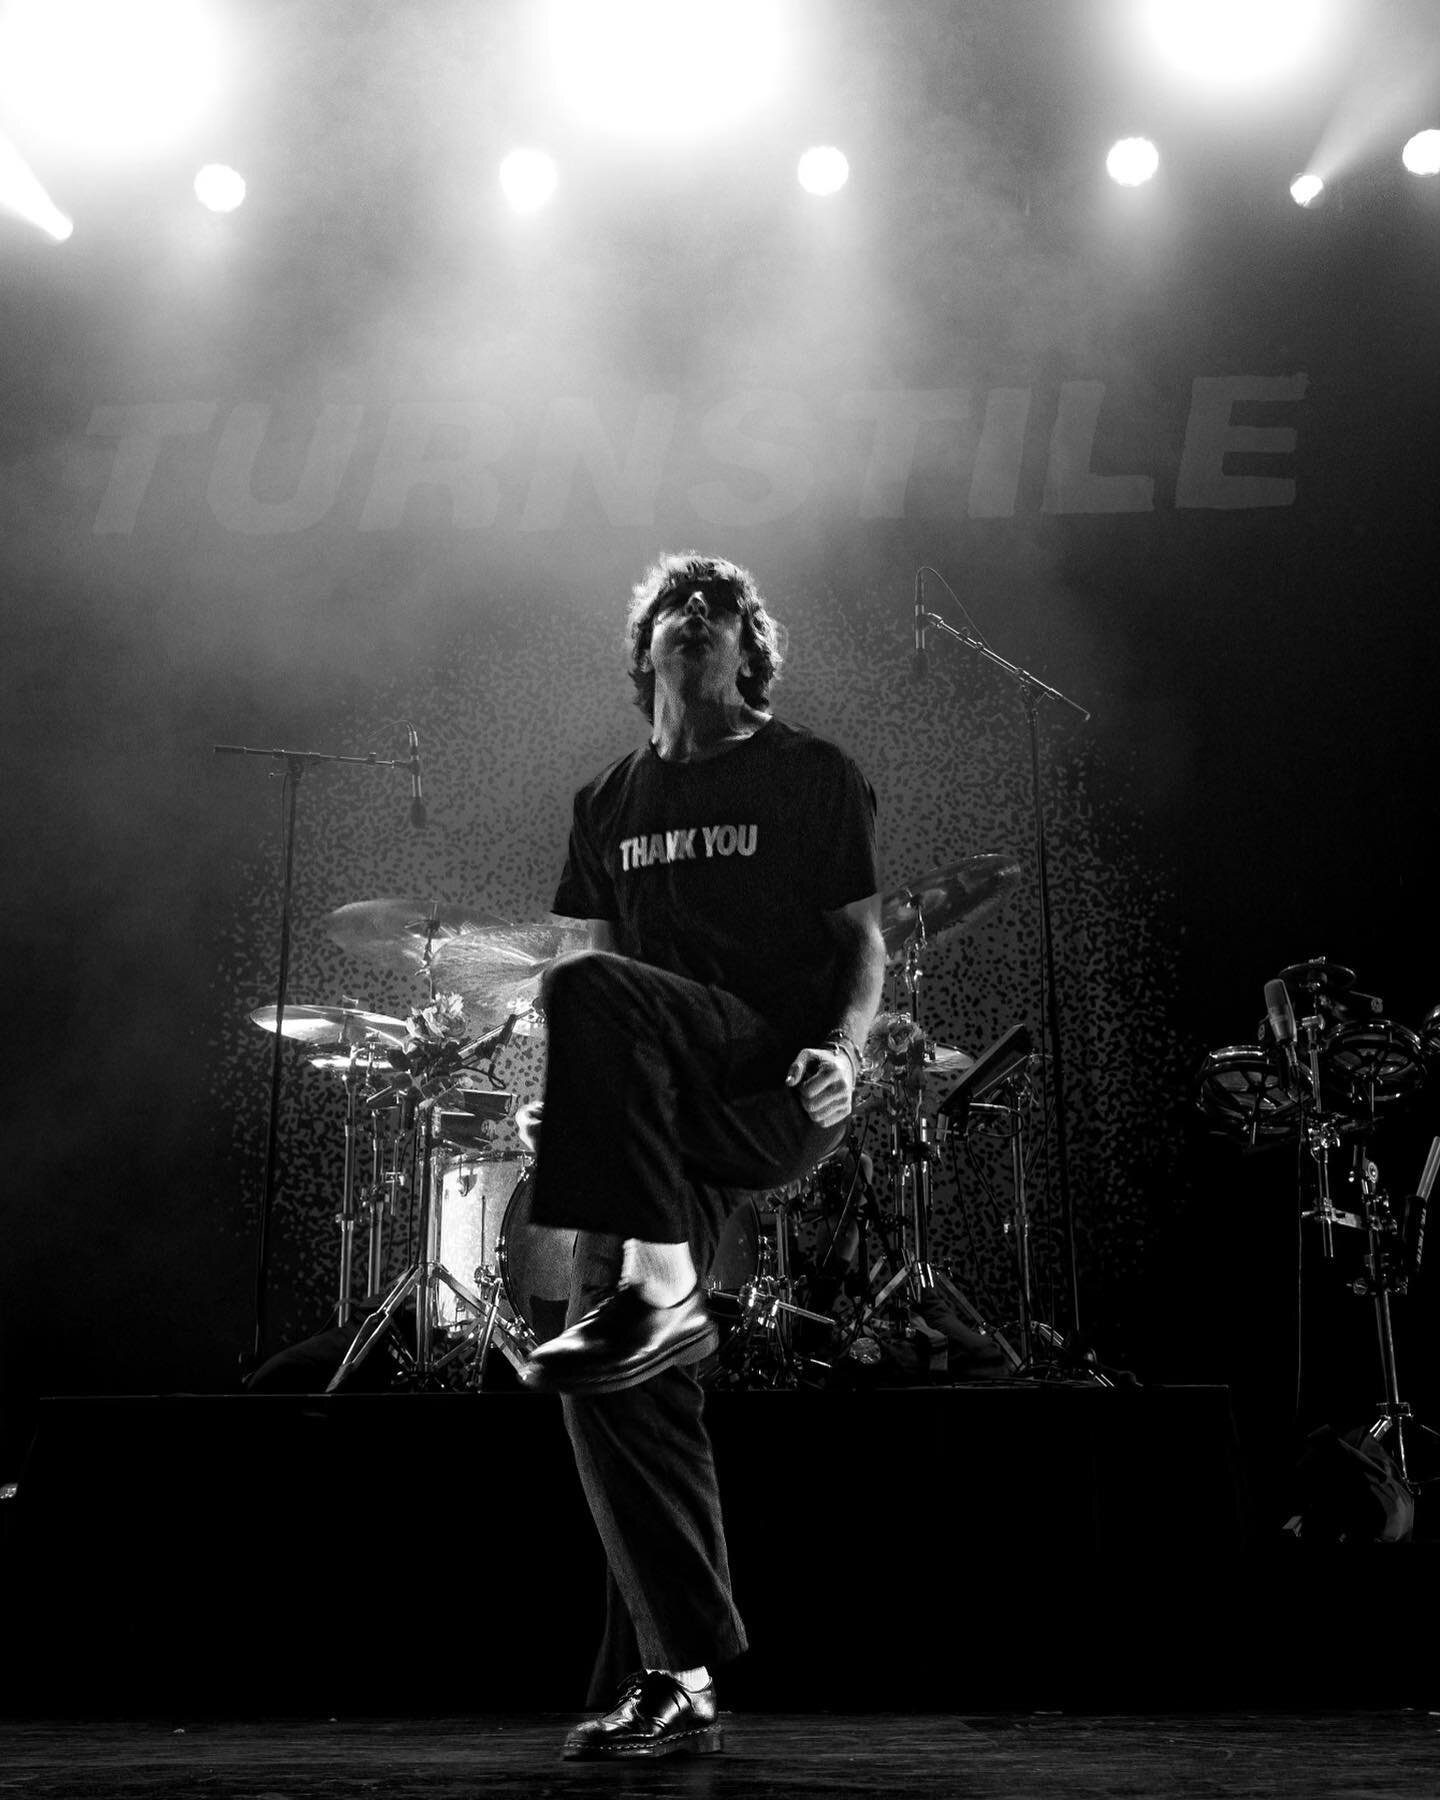 No Surprise the @turnstileluvconnection show was epic 

The Gallery + Show Review are live now under &lsquo;live coverage&rsquo; linked in bio! 

📸+🖊 @blakecran 
.
#turnstile #livemusicphotography #concertphotography